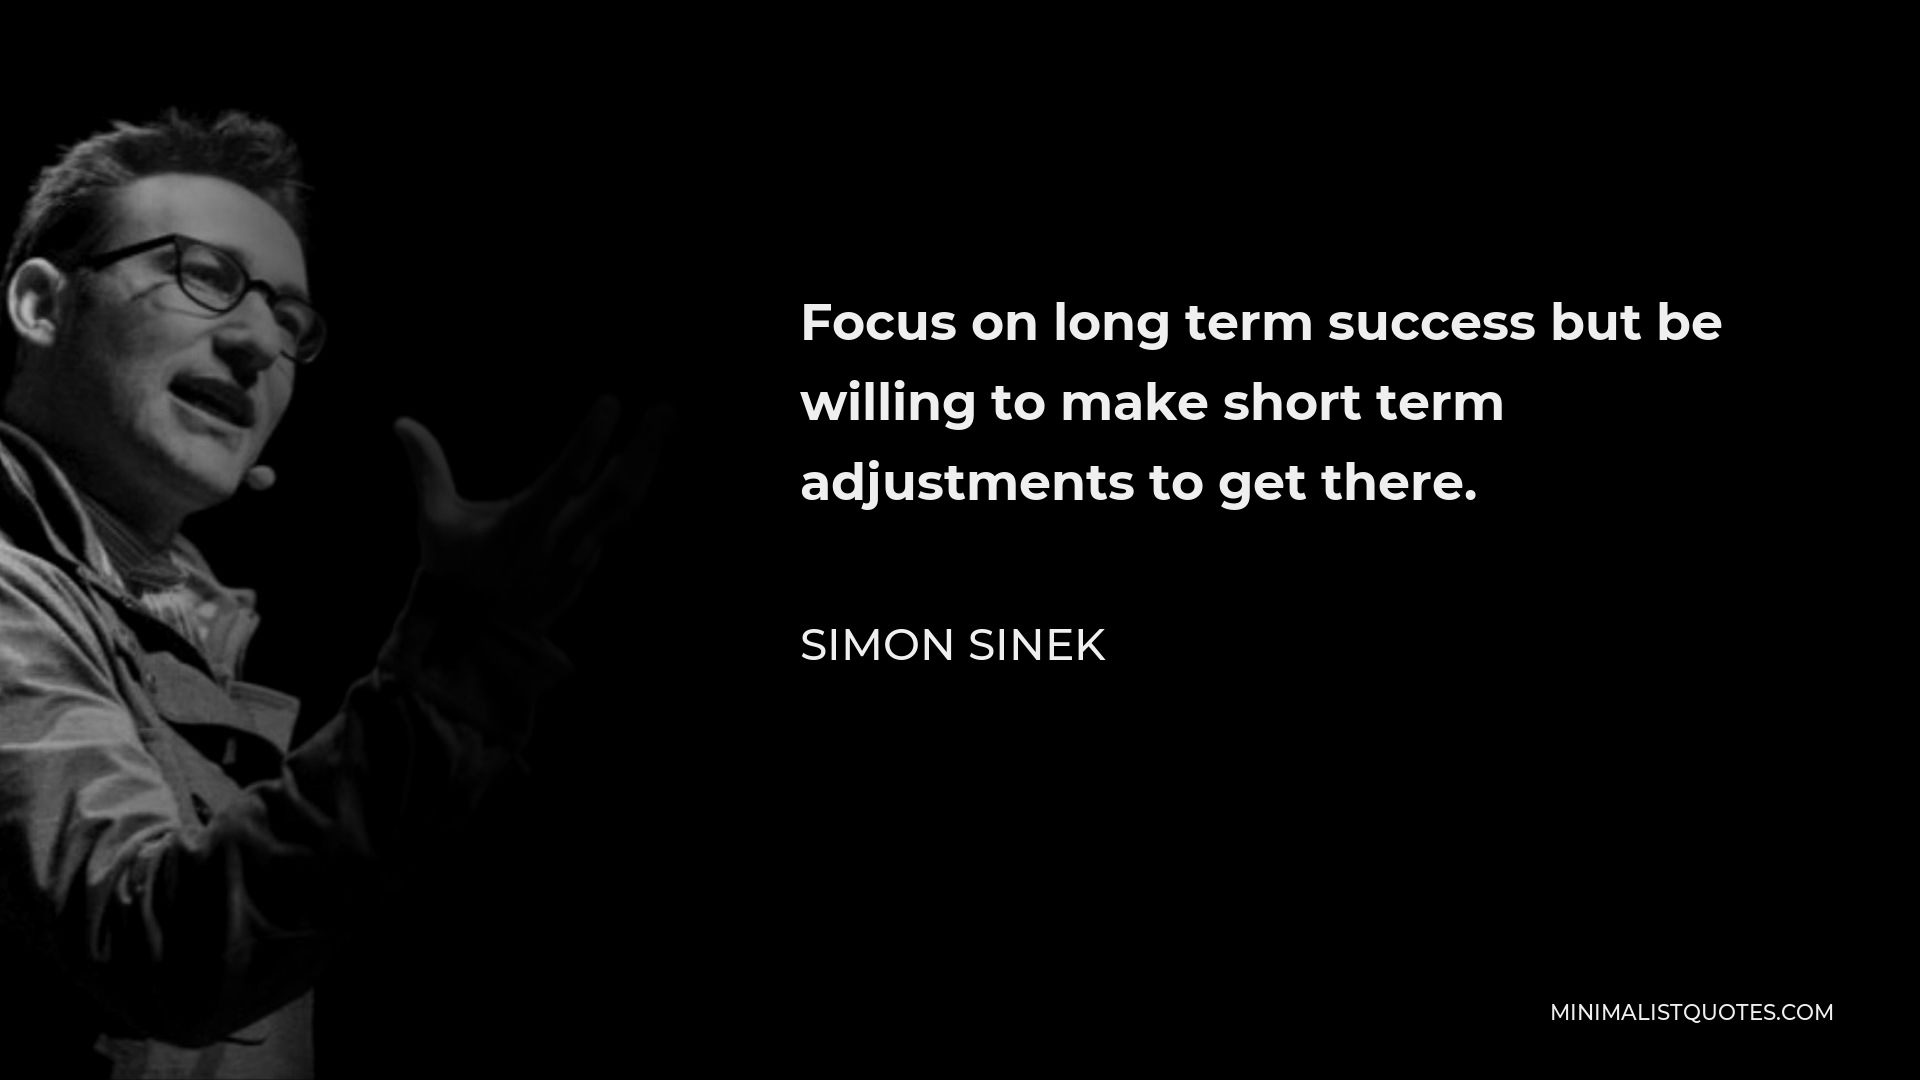 Simon Sinek Quote - Focus on long term success but be willing to make short term adjustments to get there.